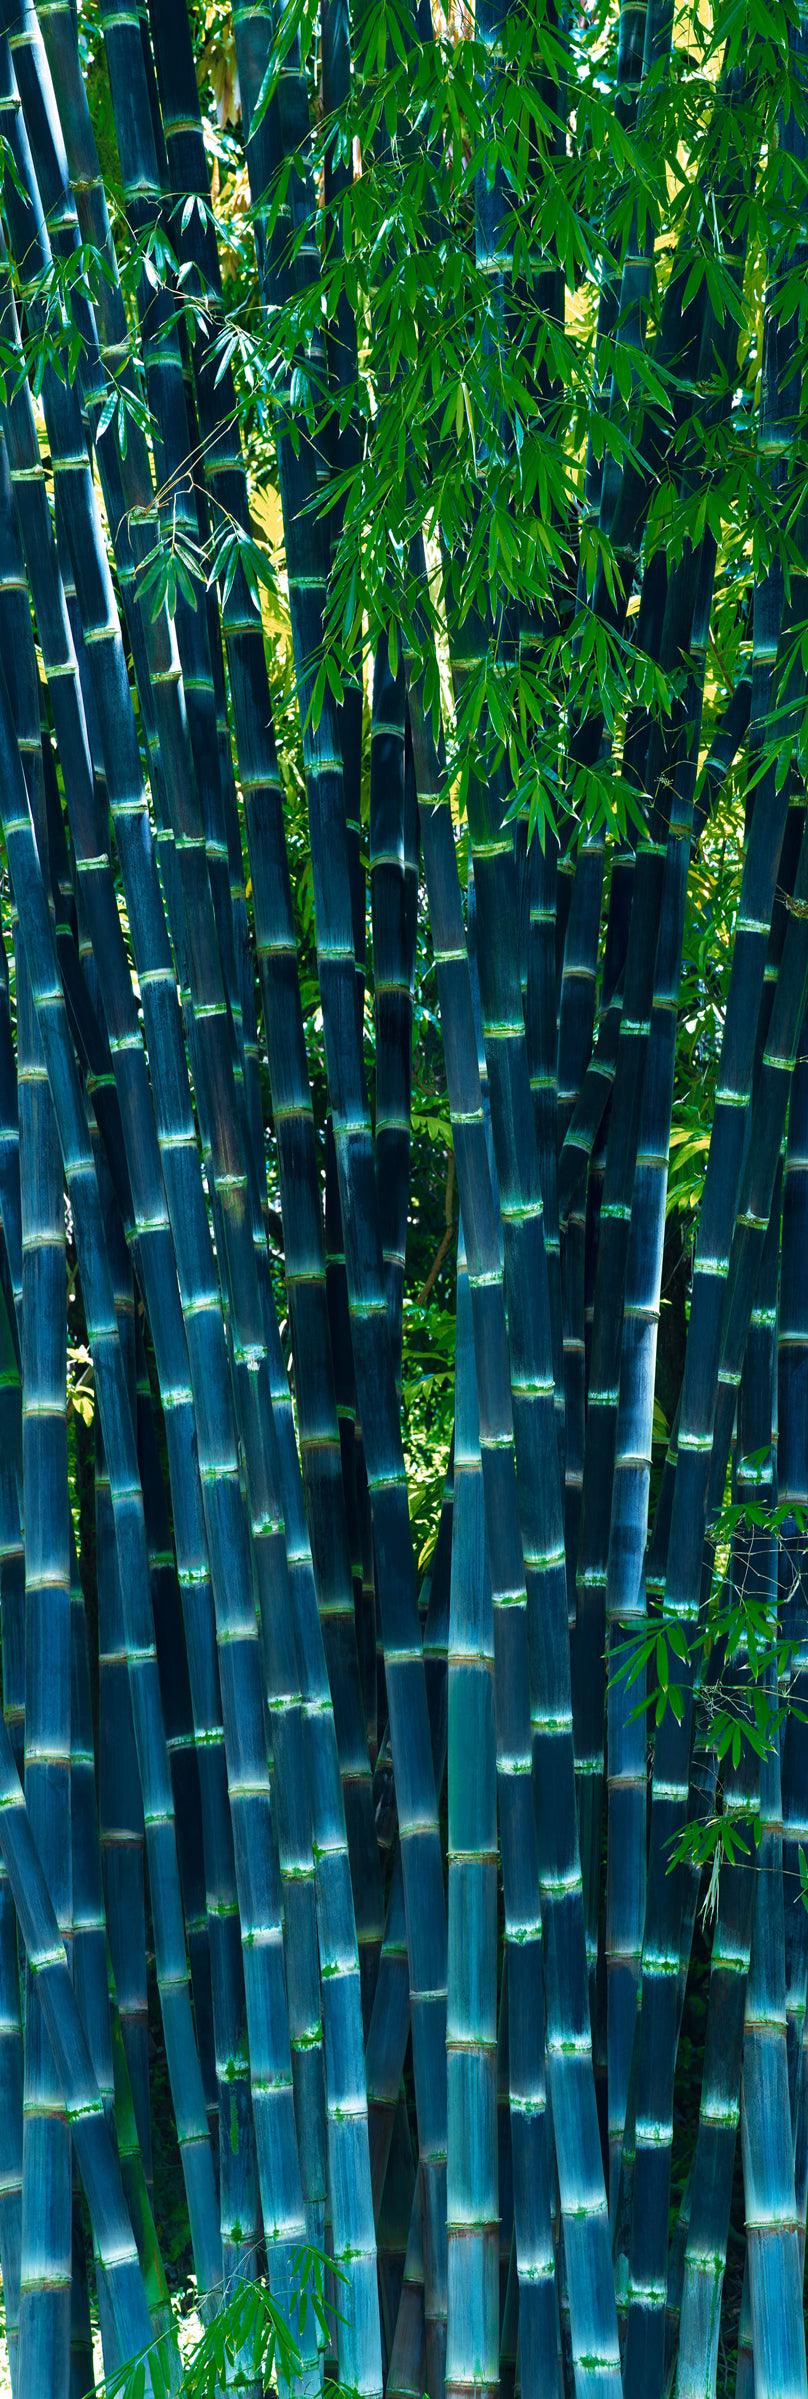 Section of tall blue bamboo in a tropical forest in Maui Hawaii